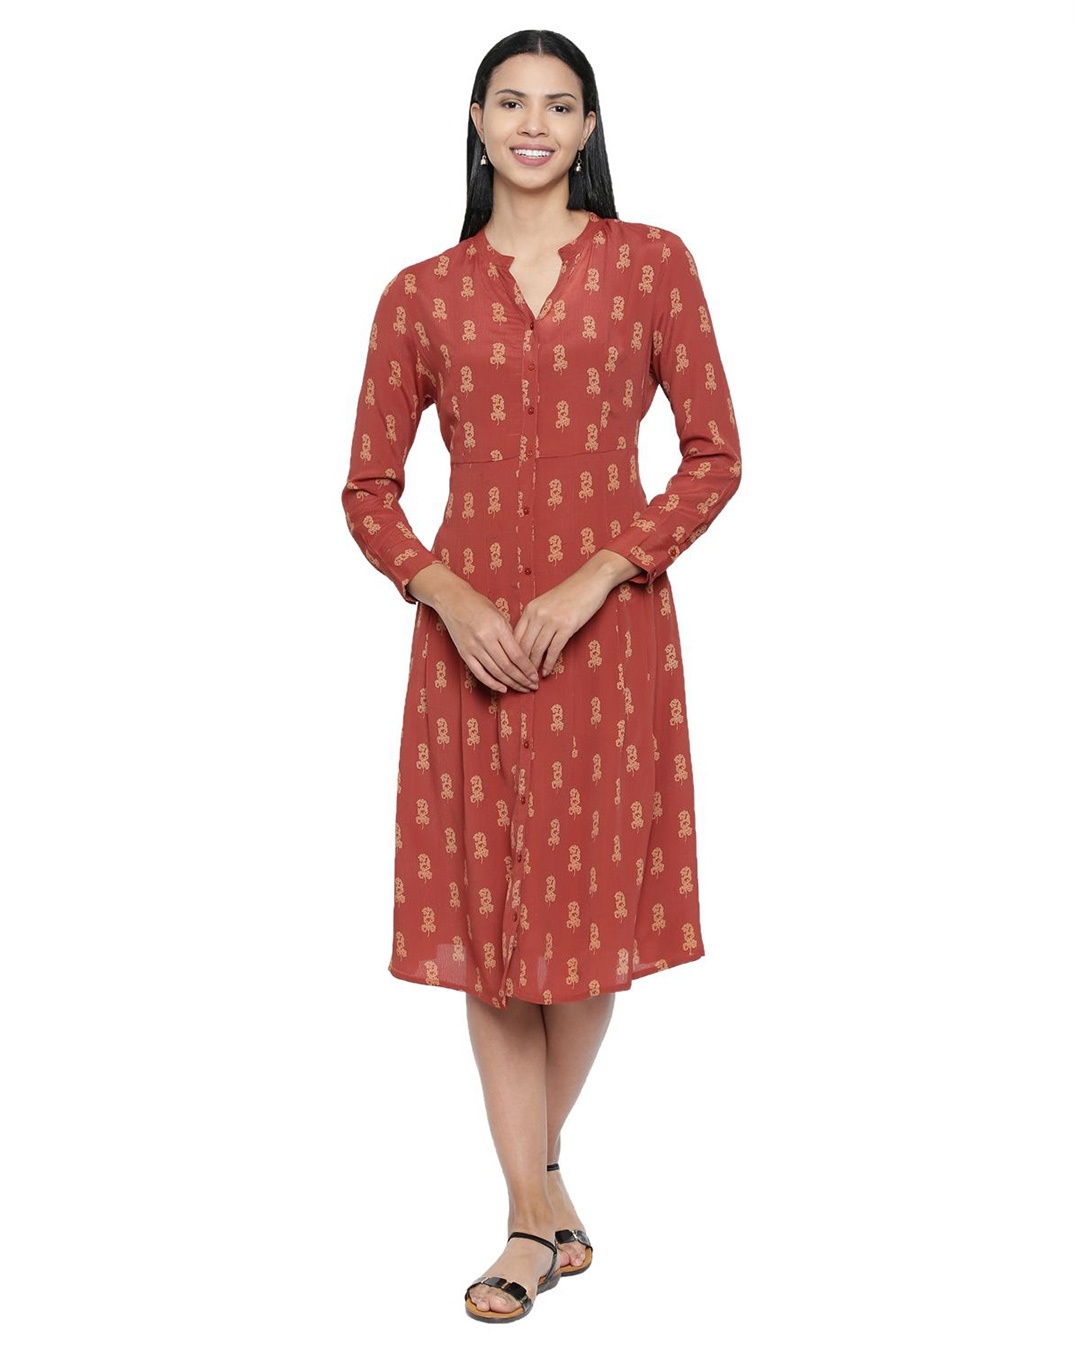 Shop Snapdragon Printed Rust Dress For Women's